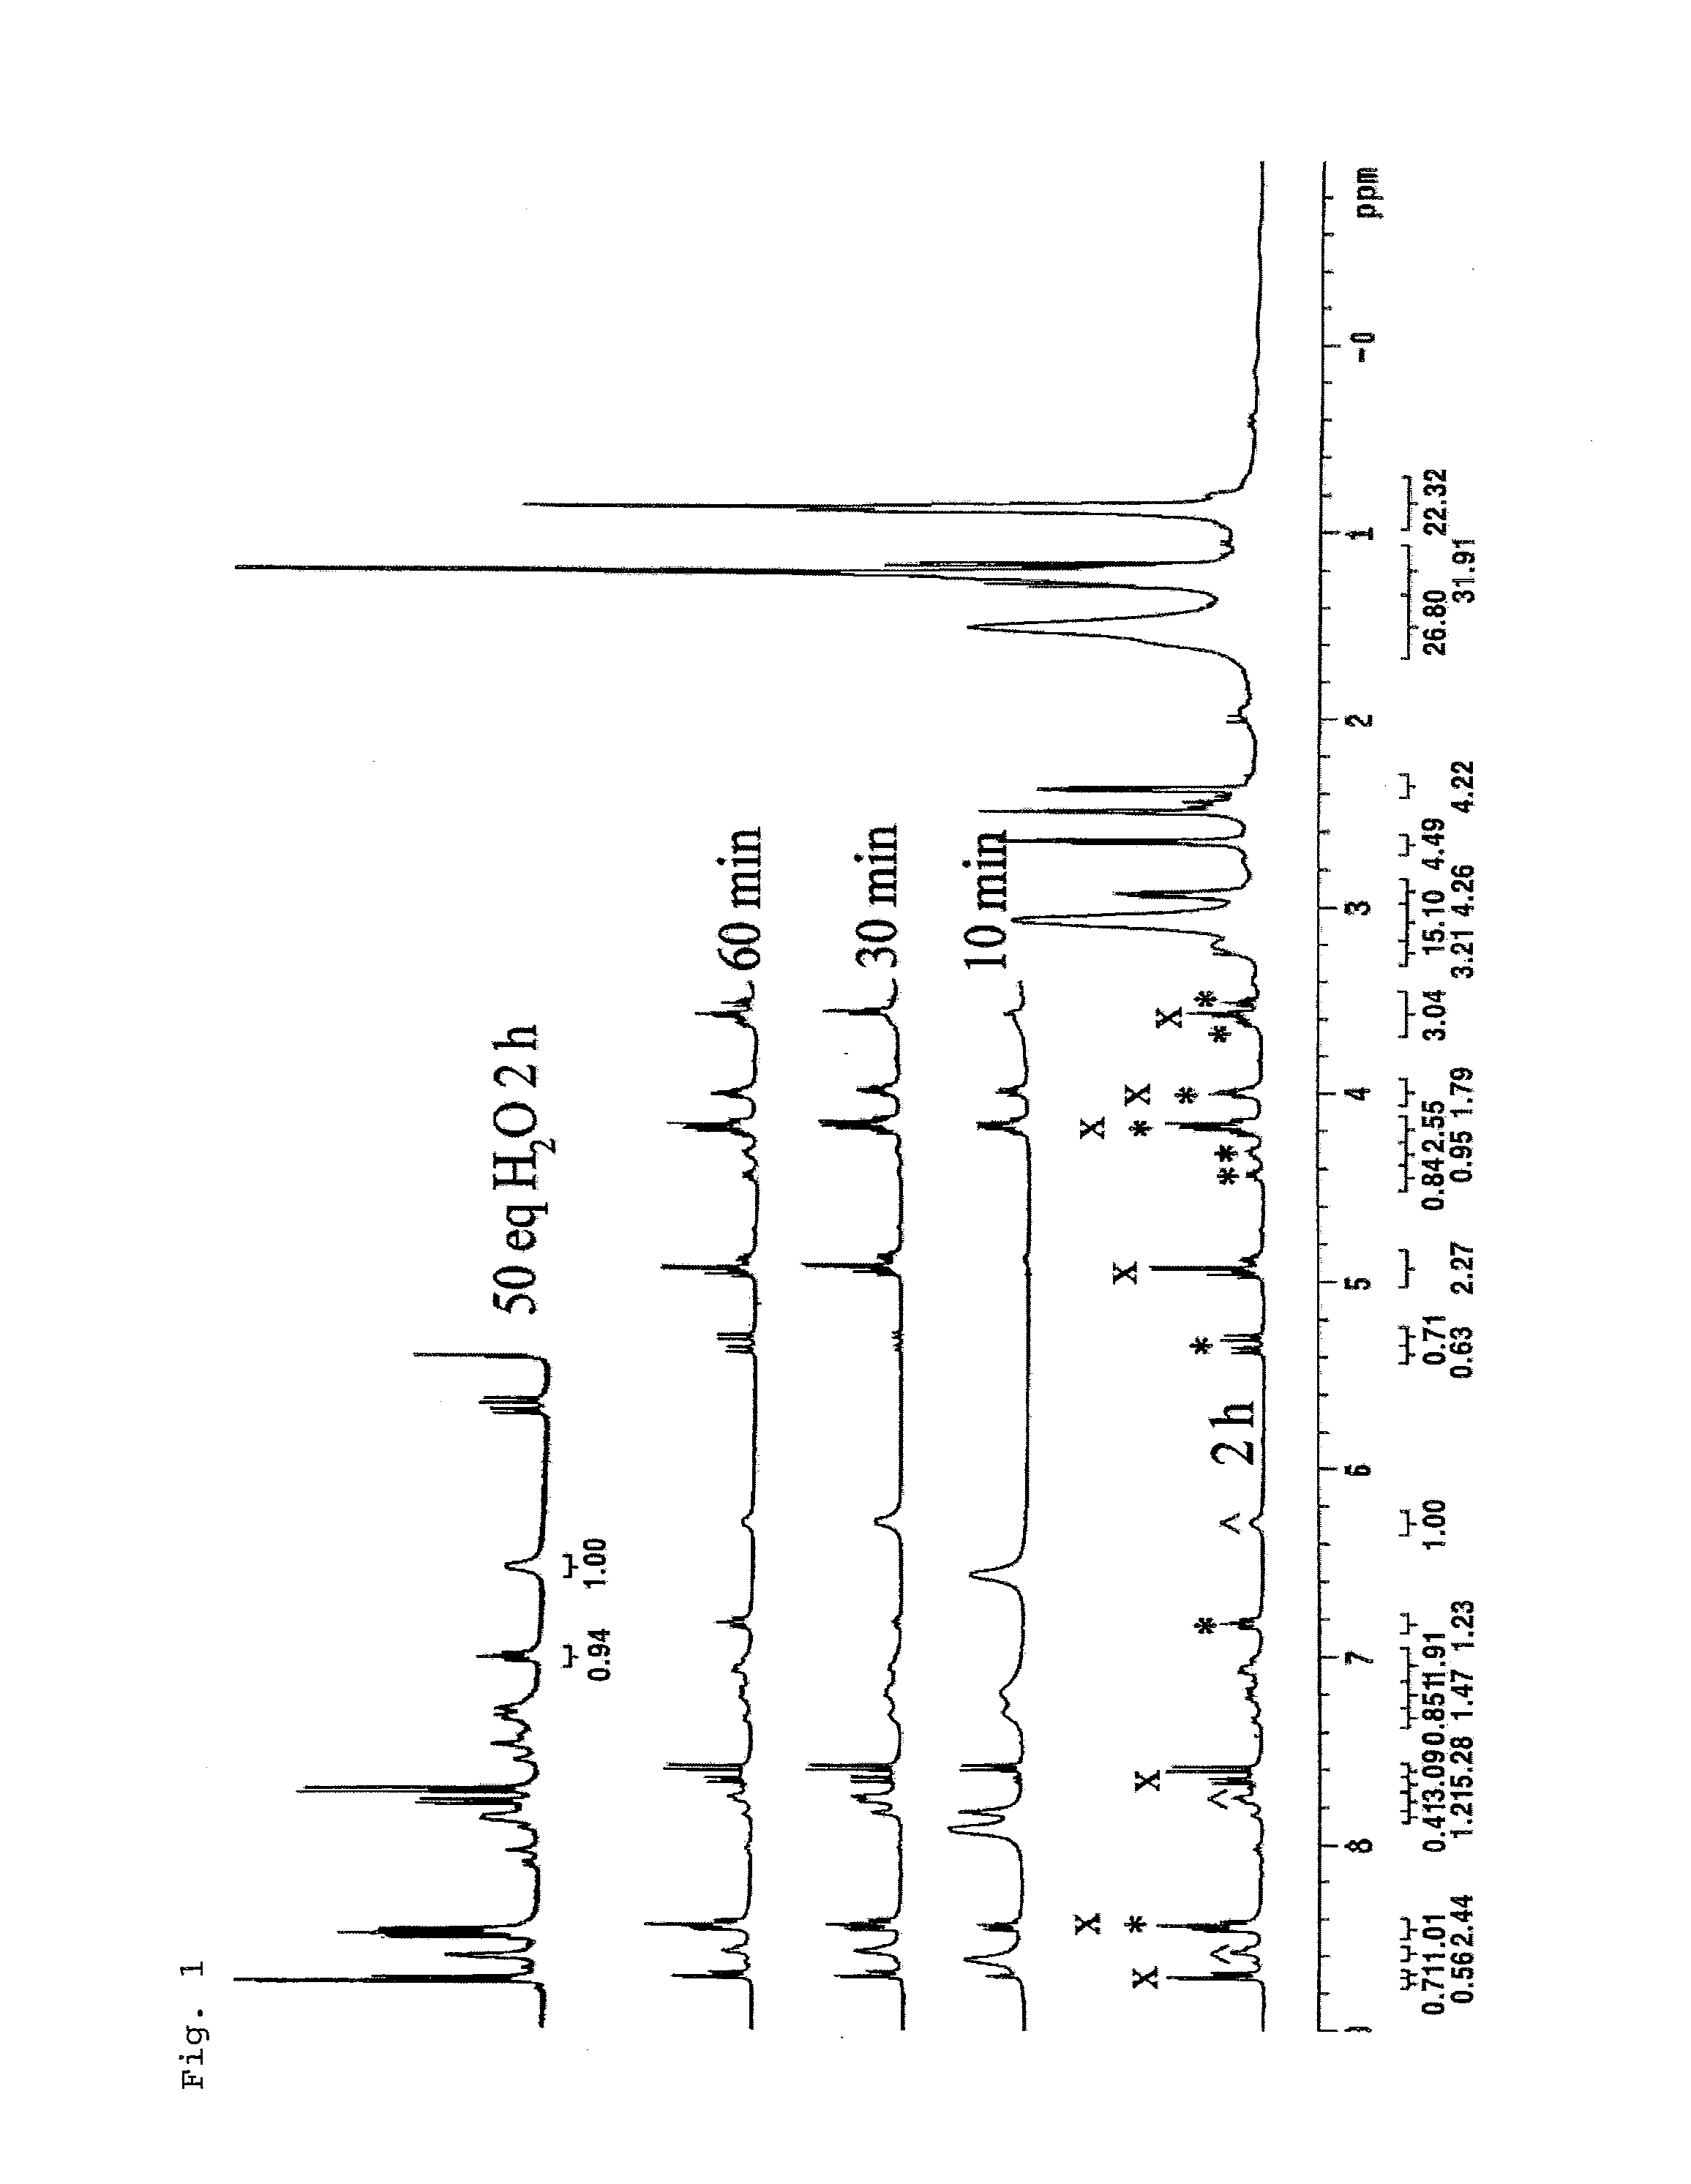 Catalytic System for CO2/Epoxide Copolymerization